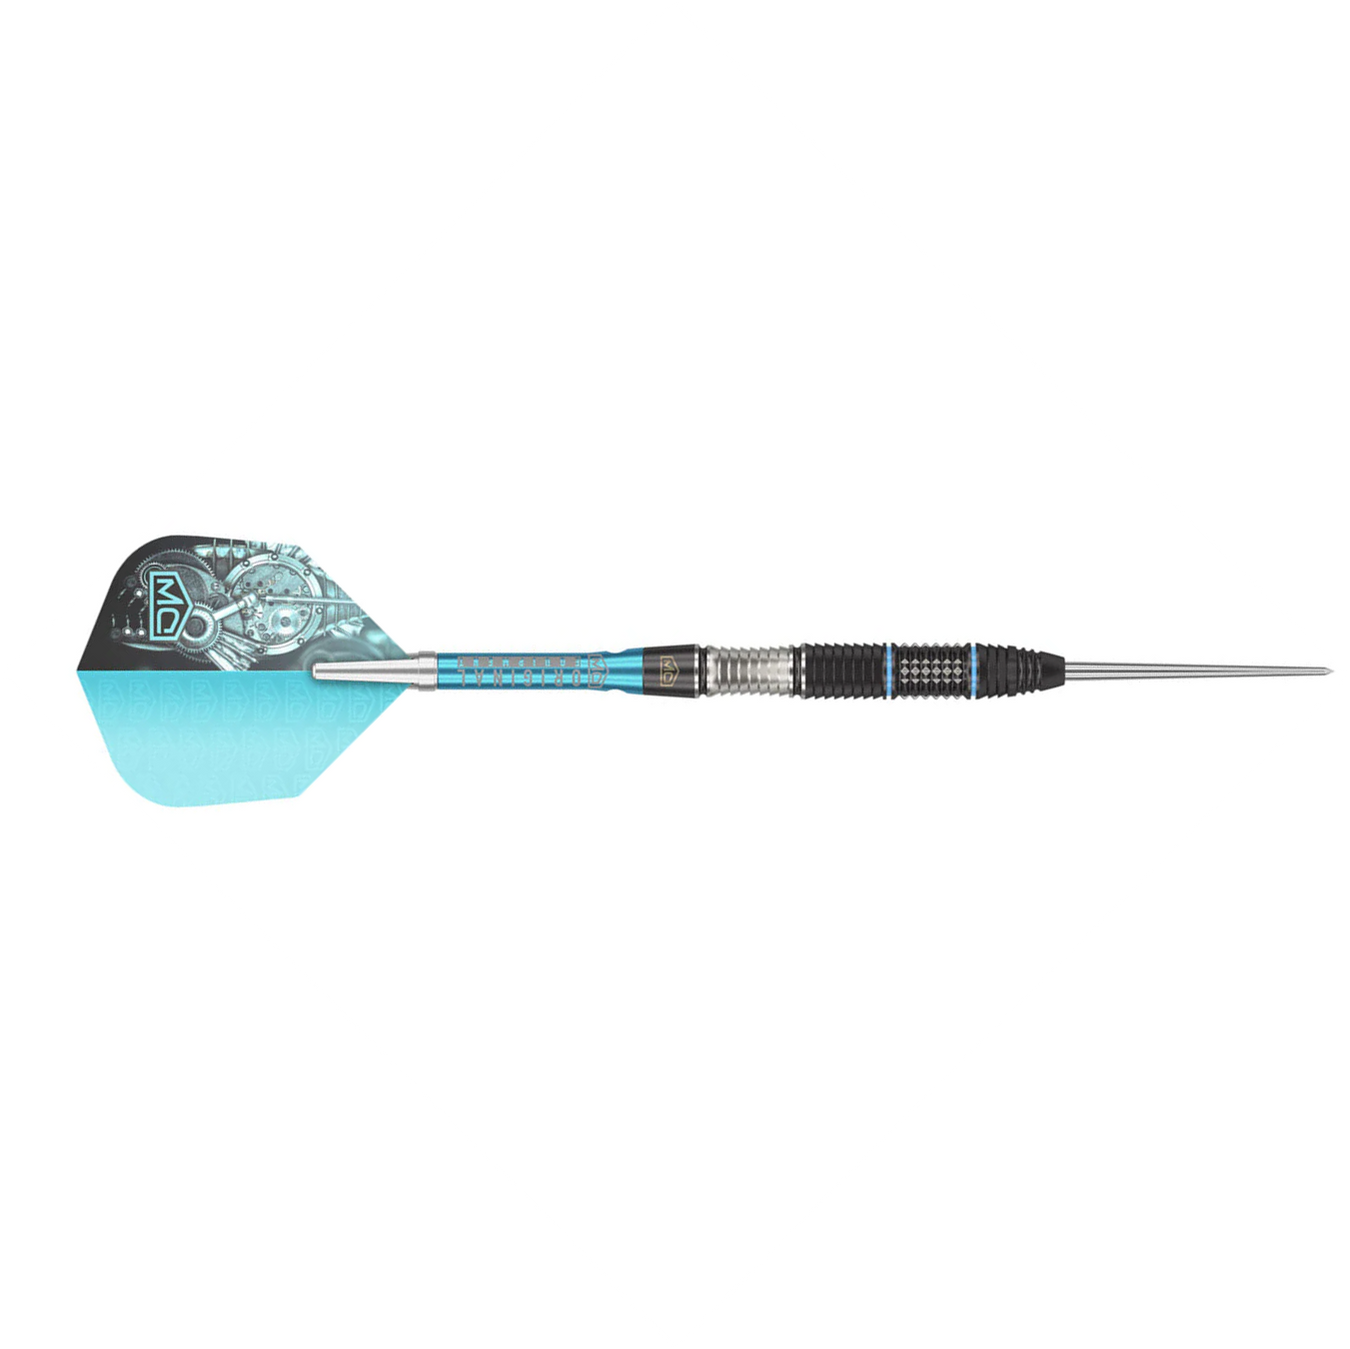 Piranha is a razor sharp range of 90% Tungsten steel tip darts.  Features multiple back cuts, mil-cuts and knurled grip zones. 